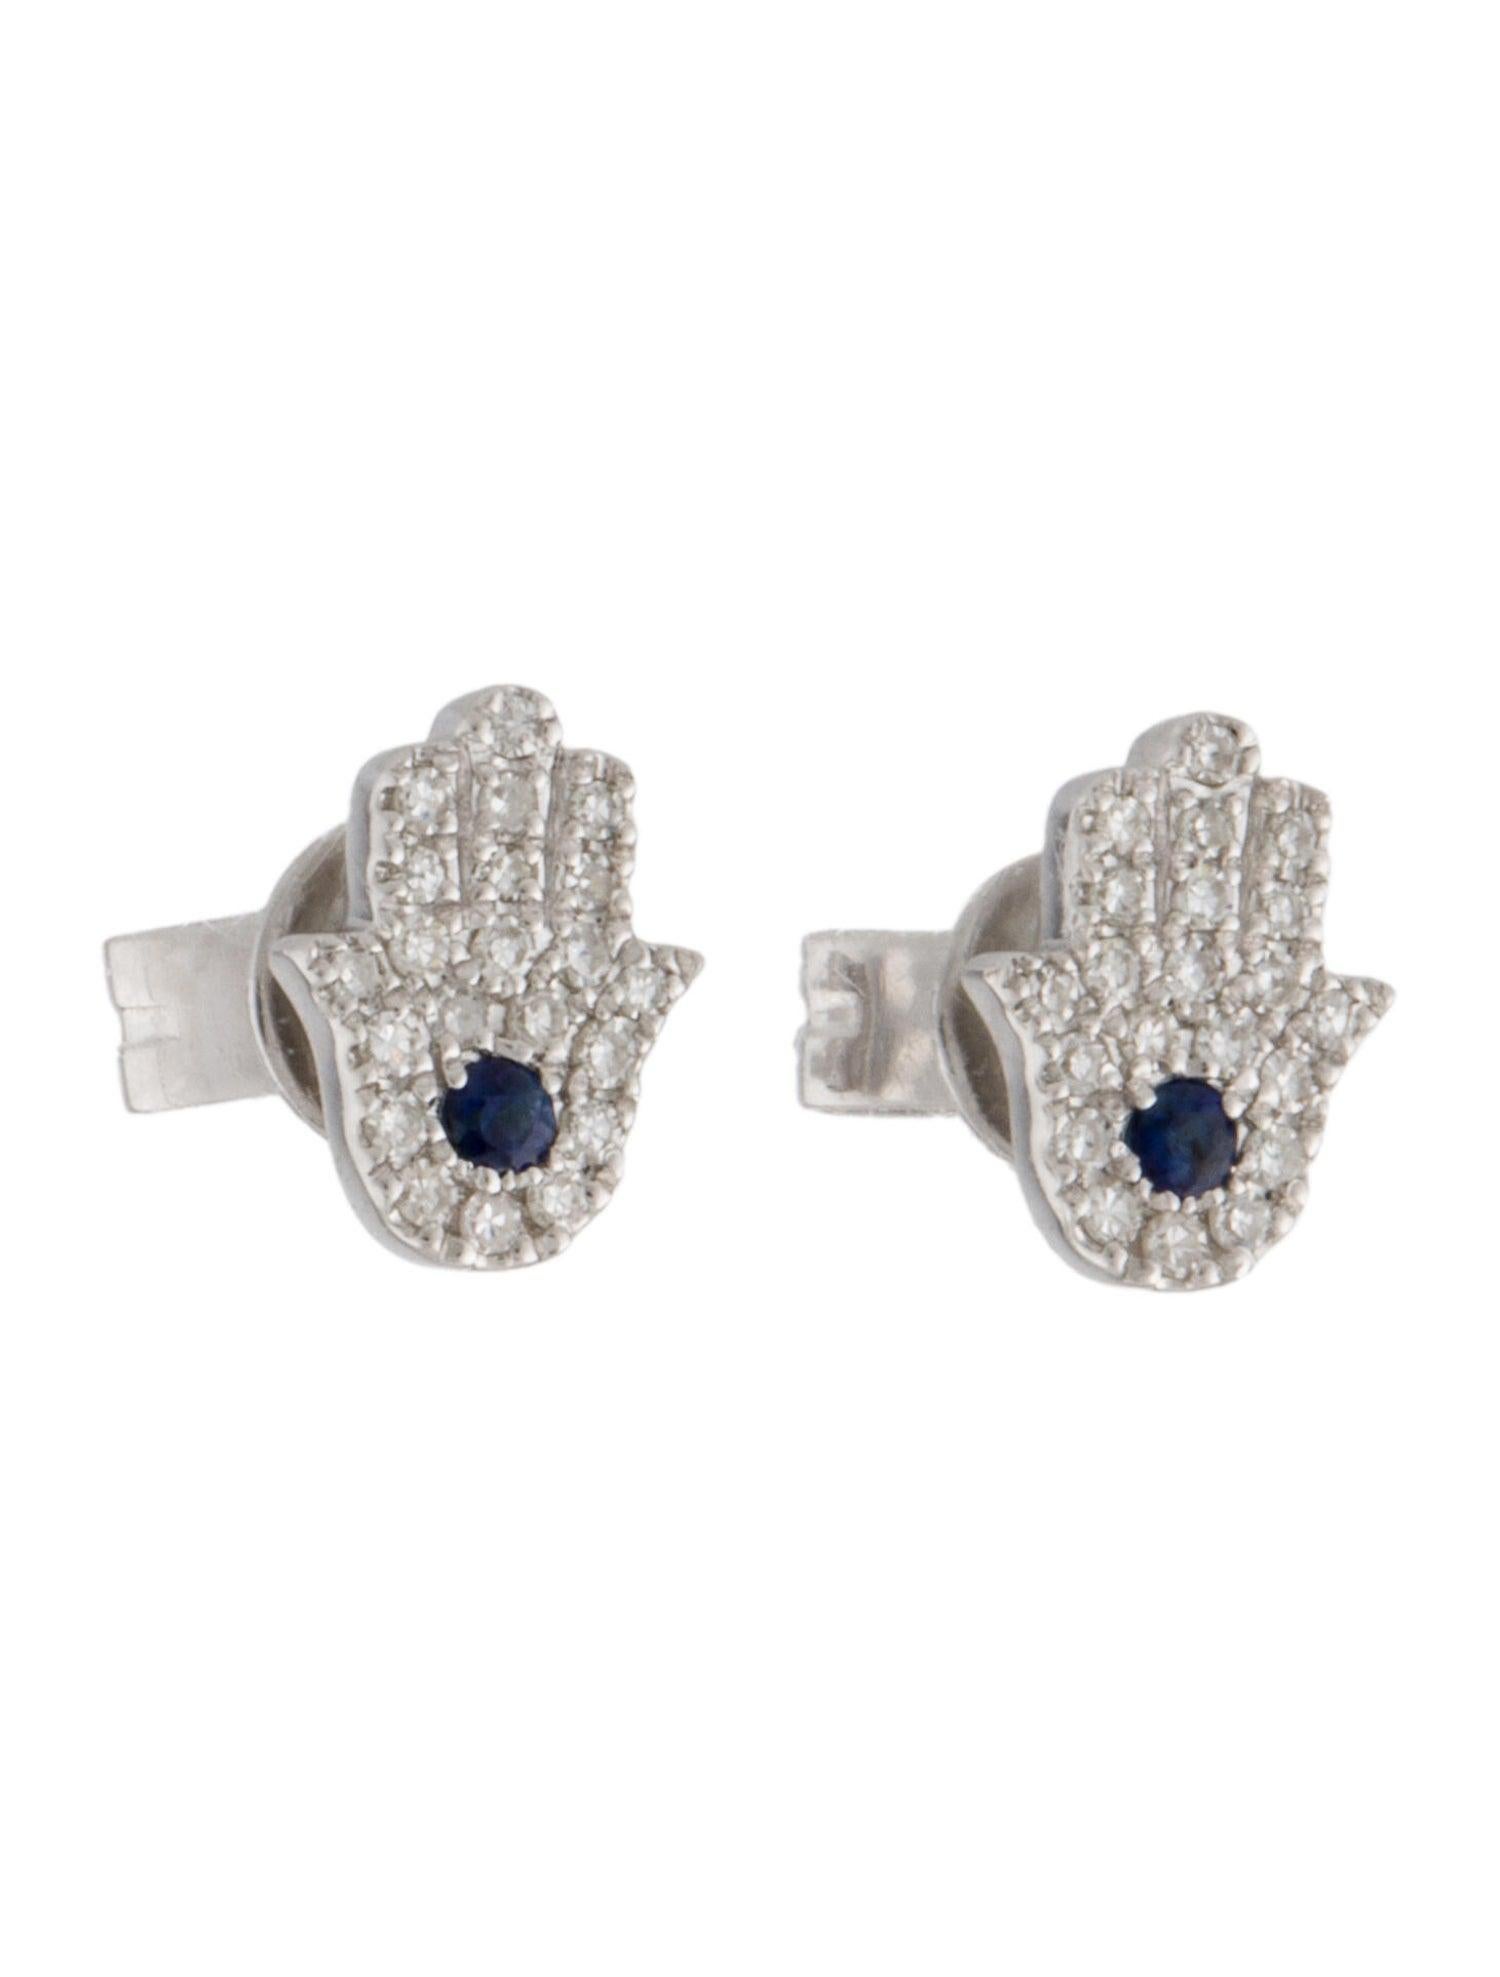 Contemporary 14K White Gold Diamond & Sapphire Hand of God Stud Earrings for Her For Sale